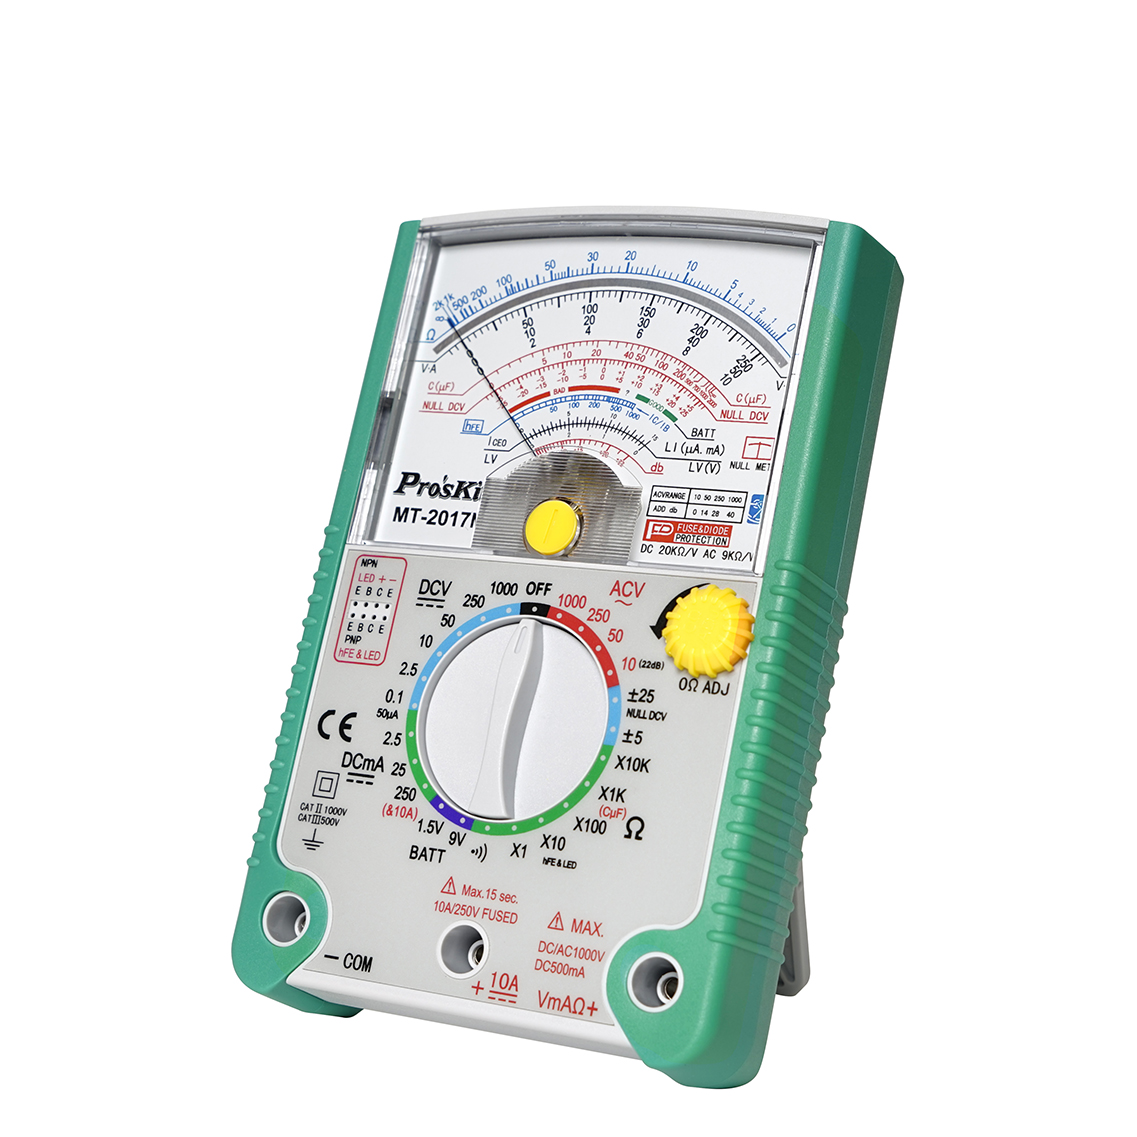 Proskit MT-2017N Protective Function Analog Multimeter - Click Image to Close